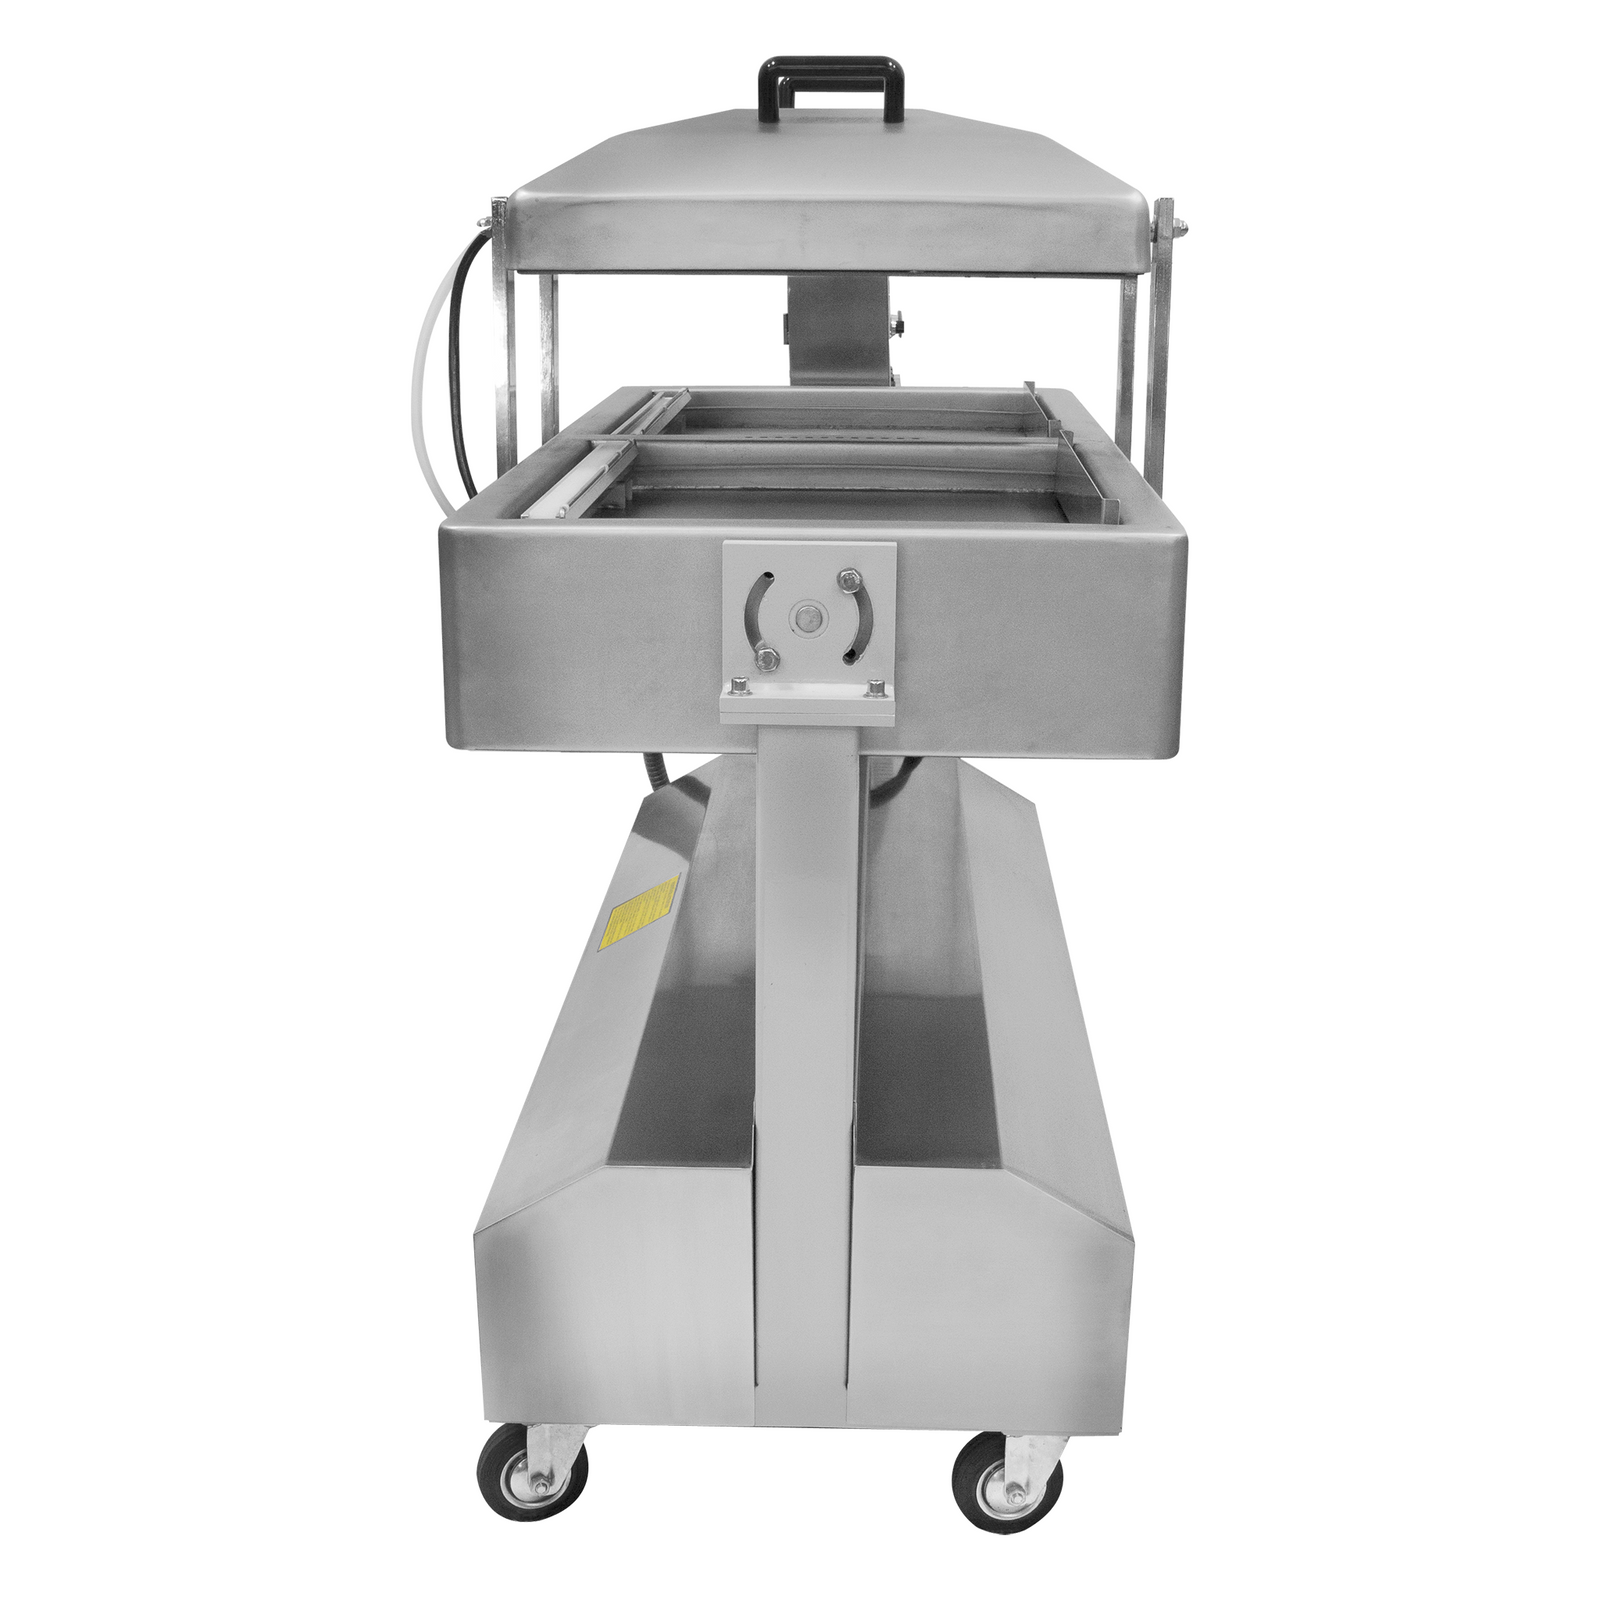 Side of the 220v JORES TECHNOLOGIES® stainless steel commercial dual reclinable chamber vacuum sealer with dual 20 inches seal bar. The chambers are positioned in a vertical position and the lid is open showing the 2 sealing bars